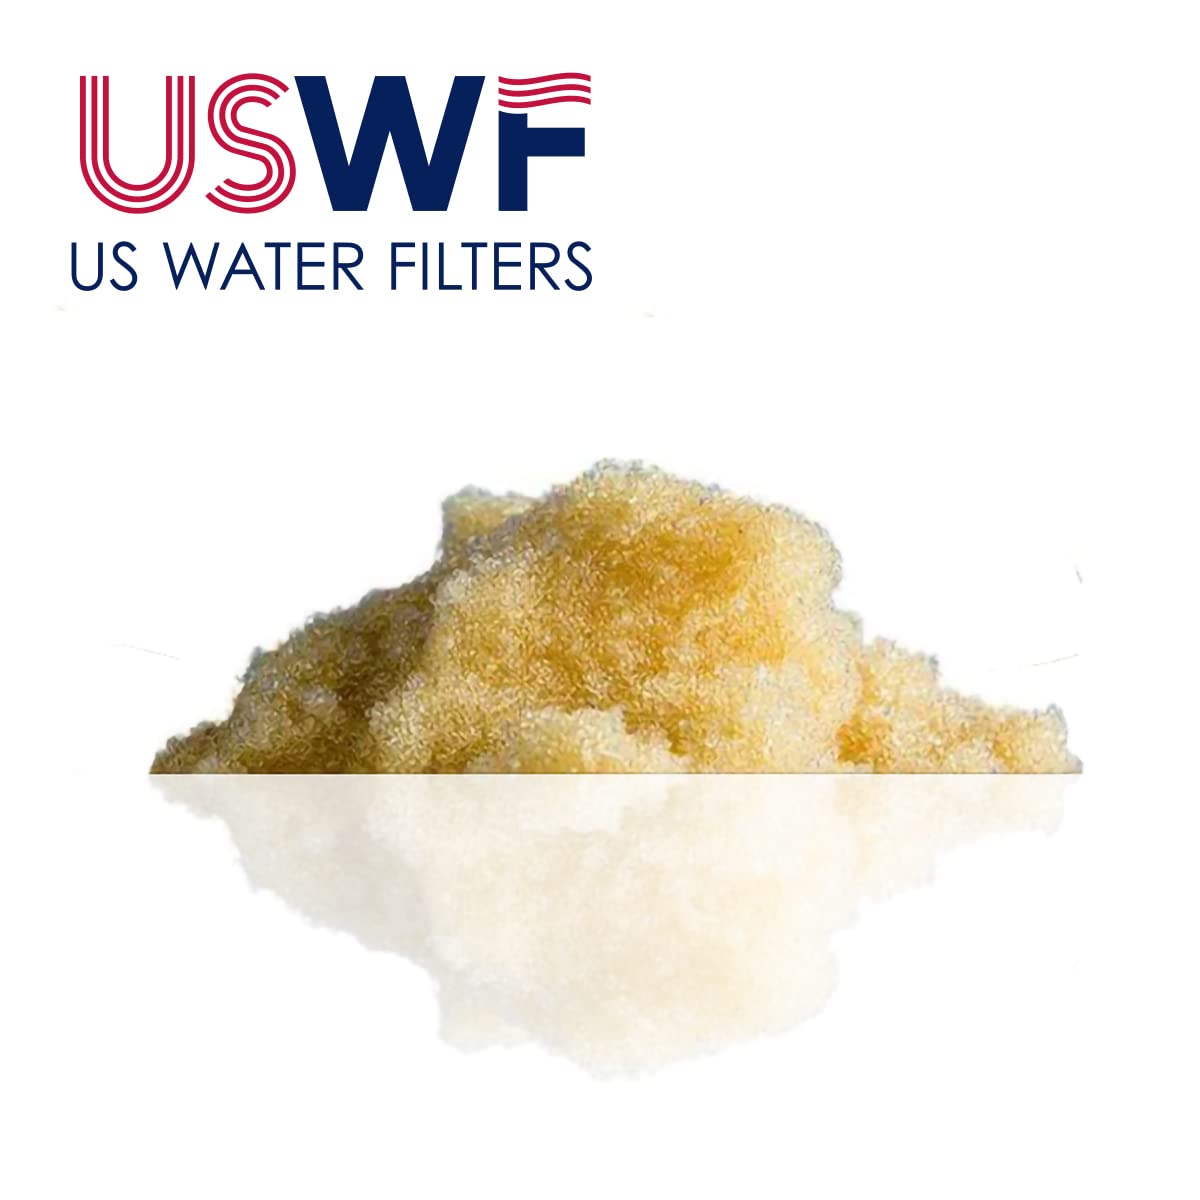 USWF-8P-12lbs Ion Exchange Water Softener Resin - 0.25 Cubic Foot - Single Bag - Ideal for Residential or Commercial Use - Reduces Soap Scum and Limescale